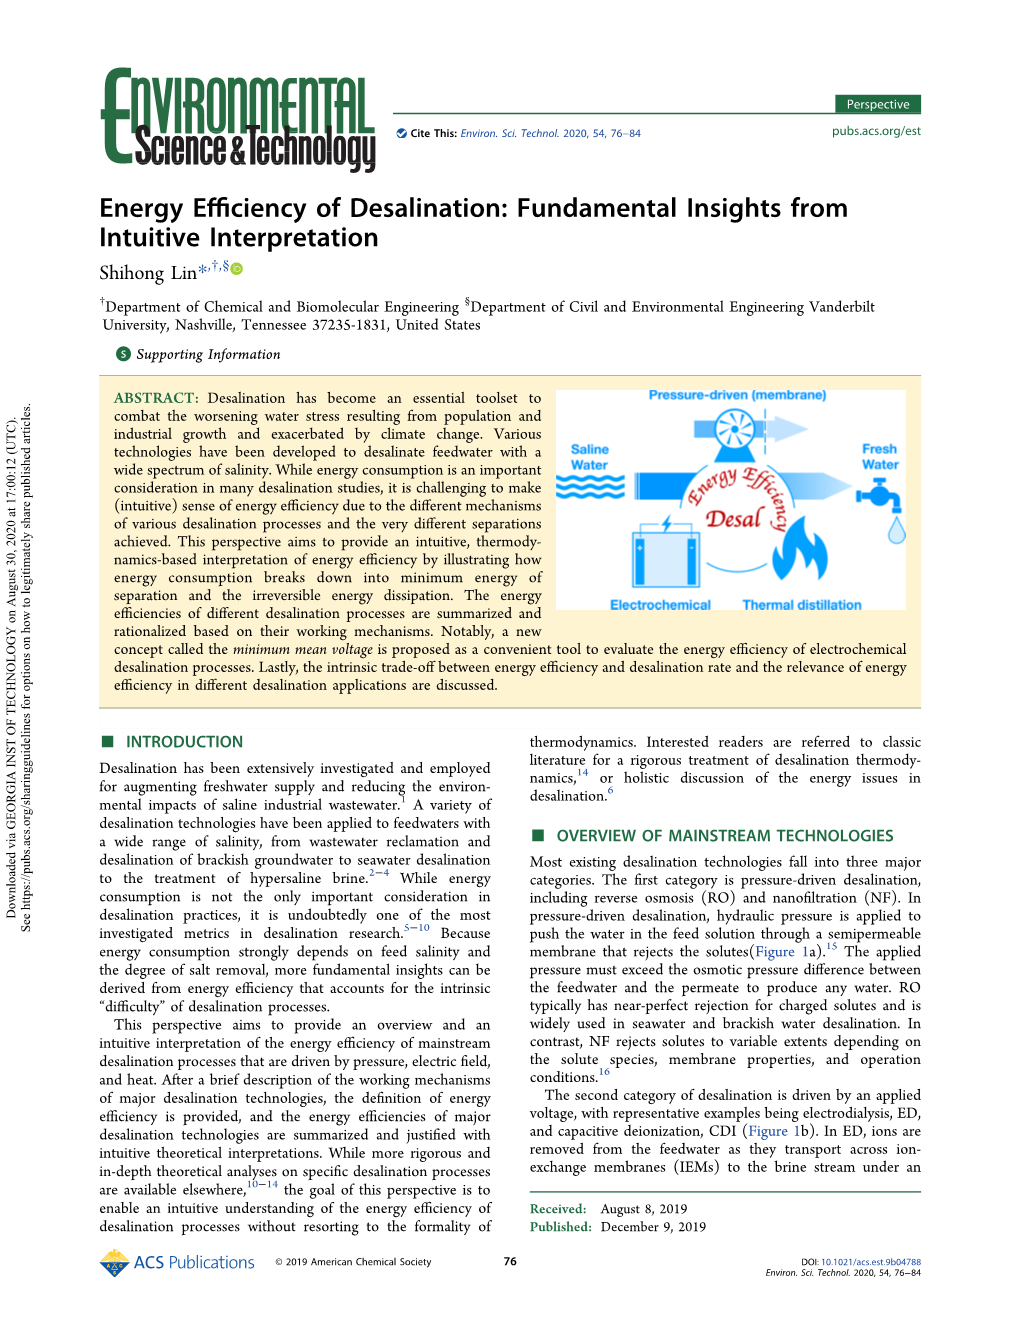 Energy Efficiency of Desalination: Fundamental Insights from Intuitive